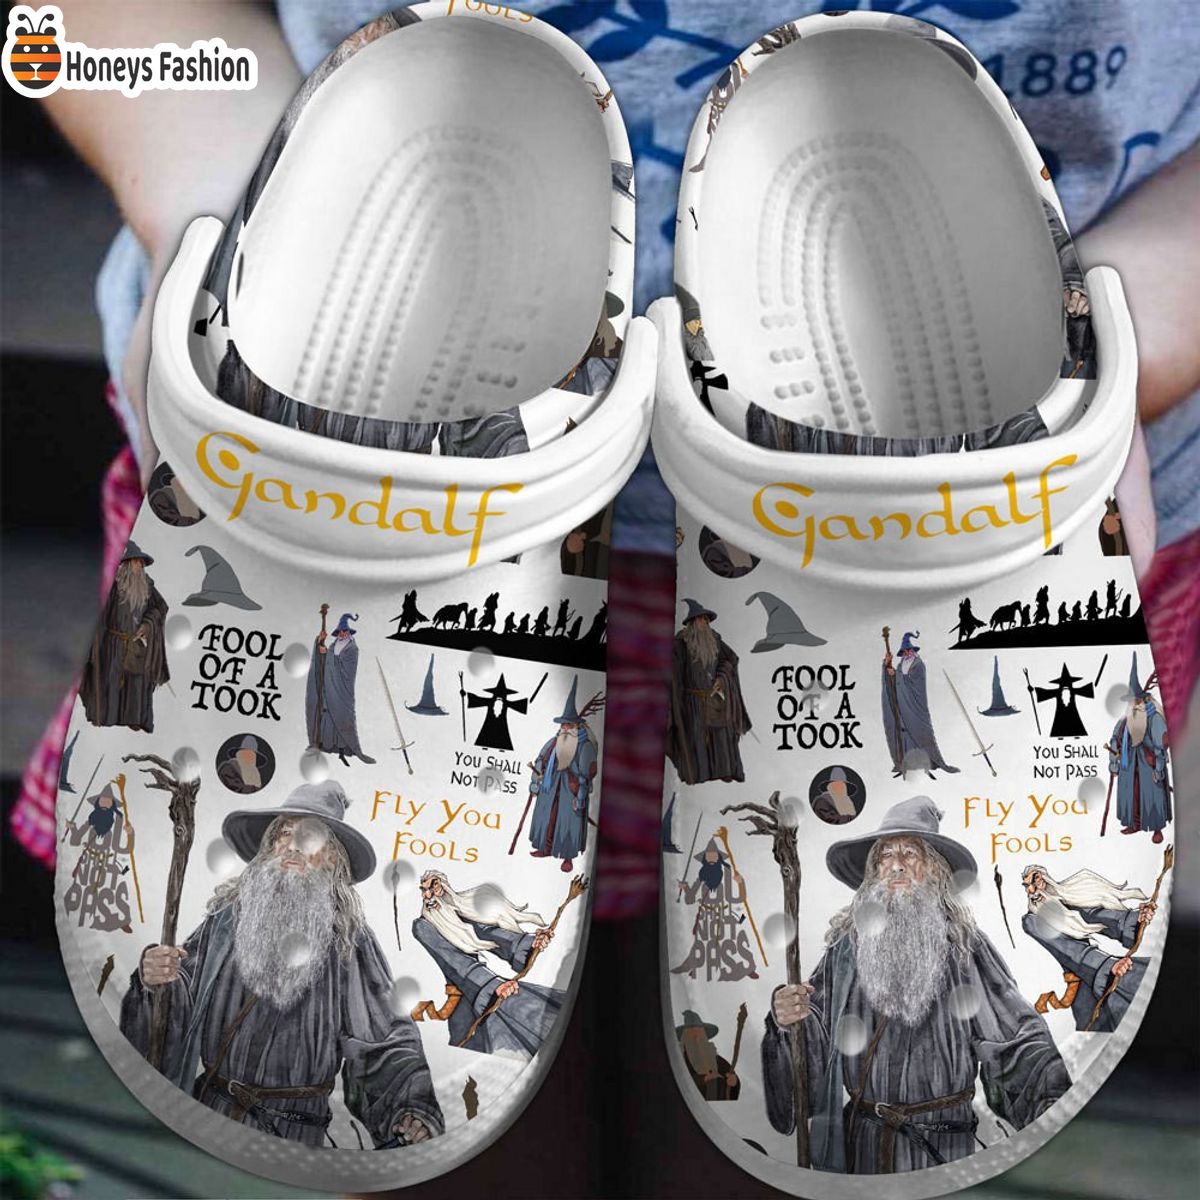 Gandalf The Lord Of The Rings Movie Crocs Crocband